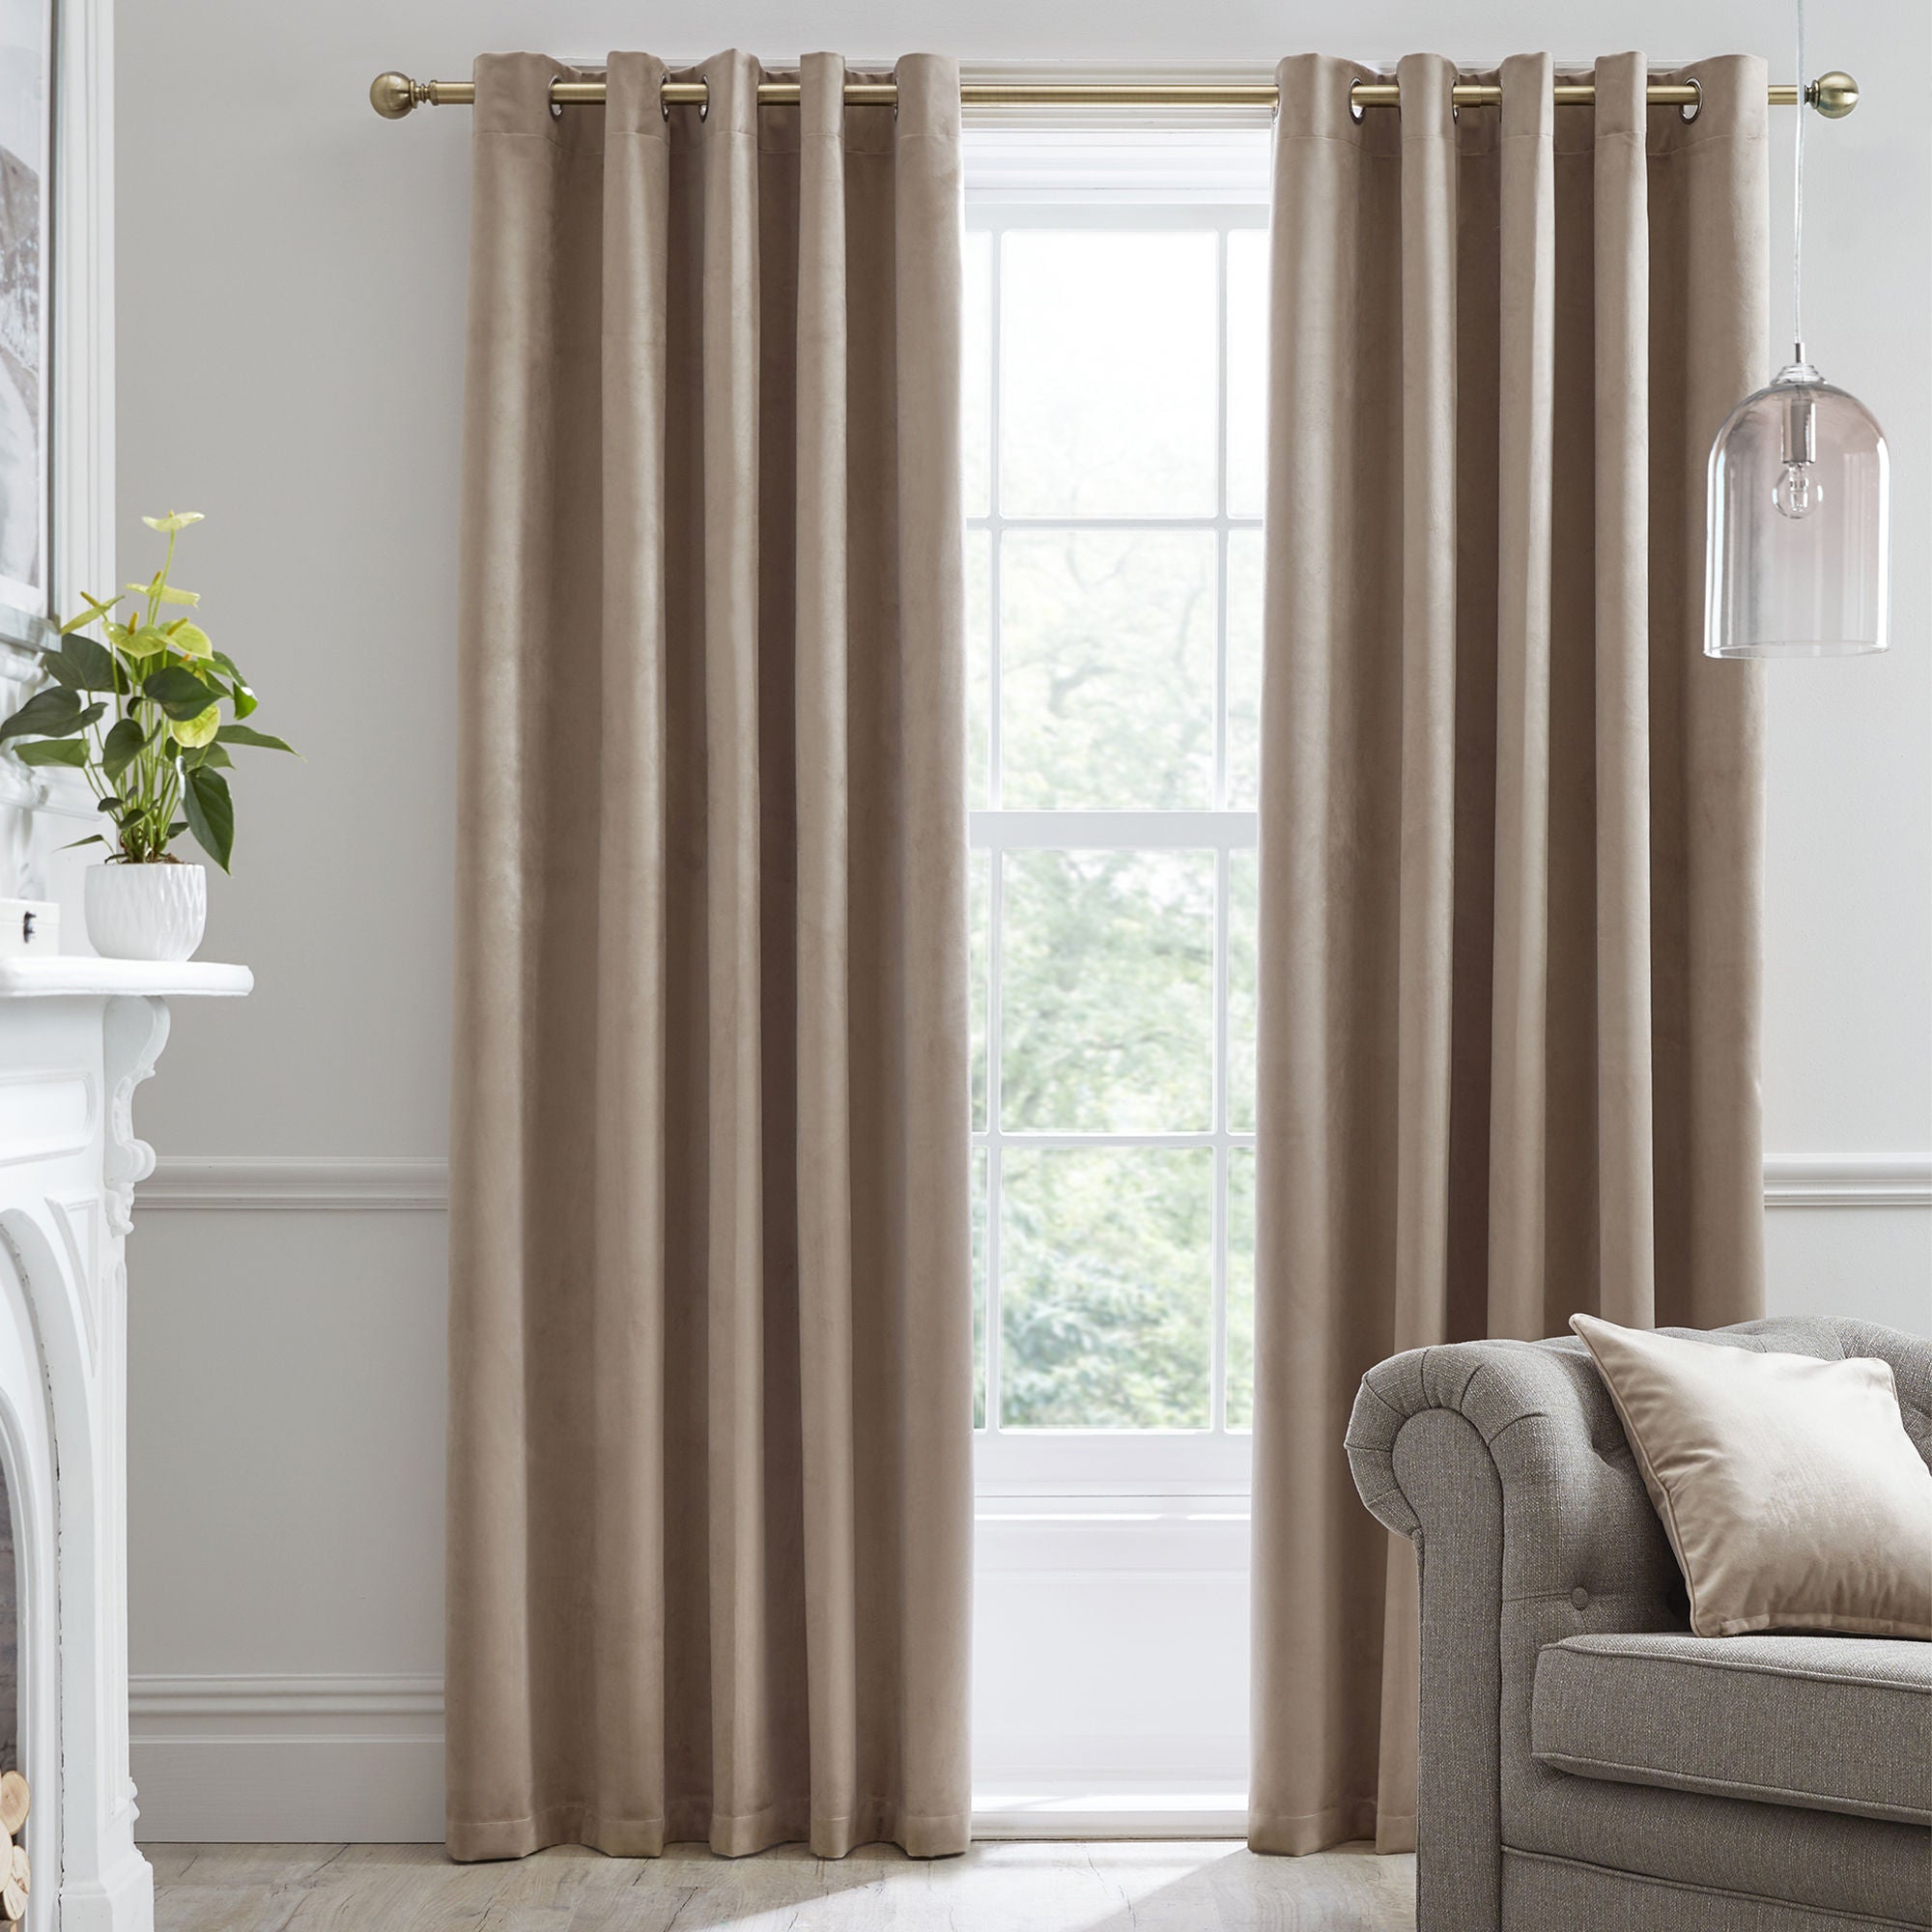 Montrose Pair of Eyelet Curtains by Laurence Llewelyn-Bowen in Linen - Pair of Eyelet Curtains - Laurence Llewelyn-Bowen